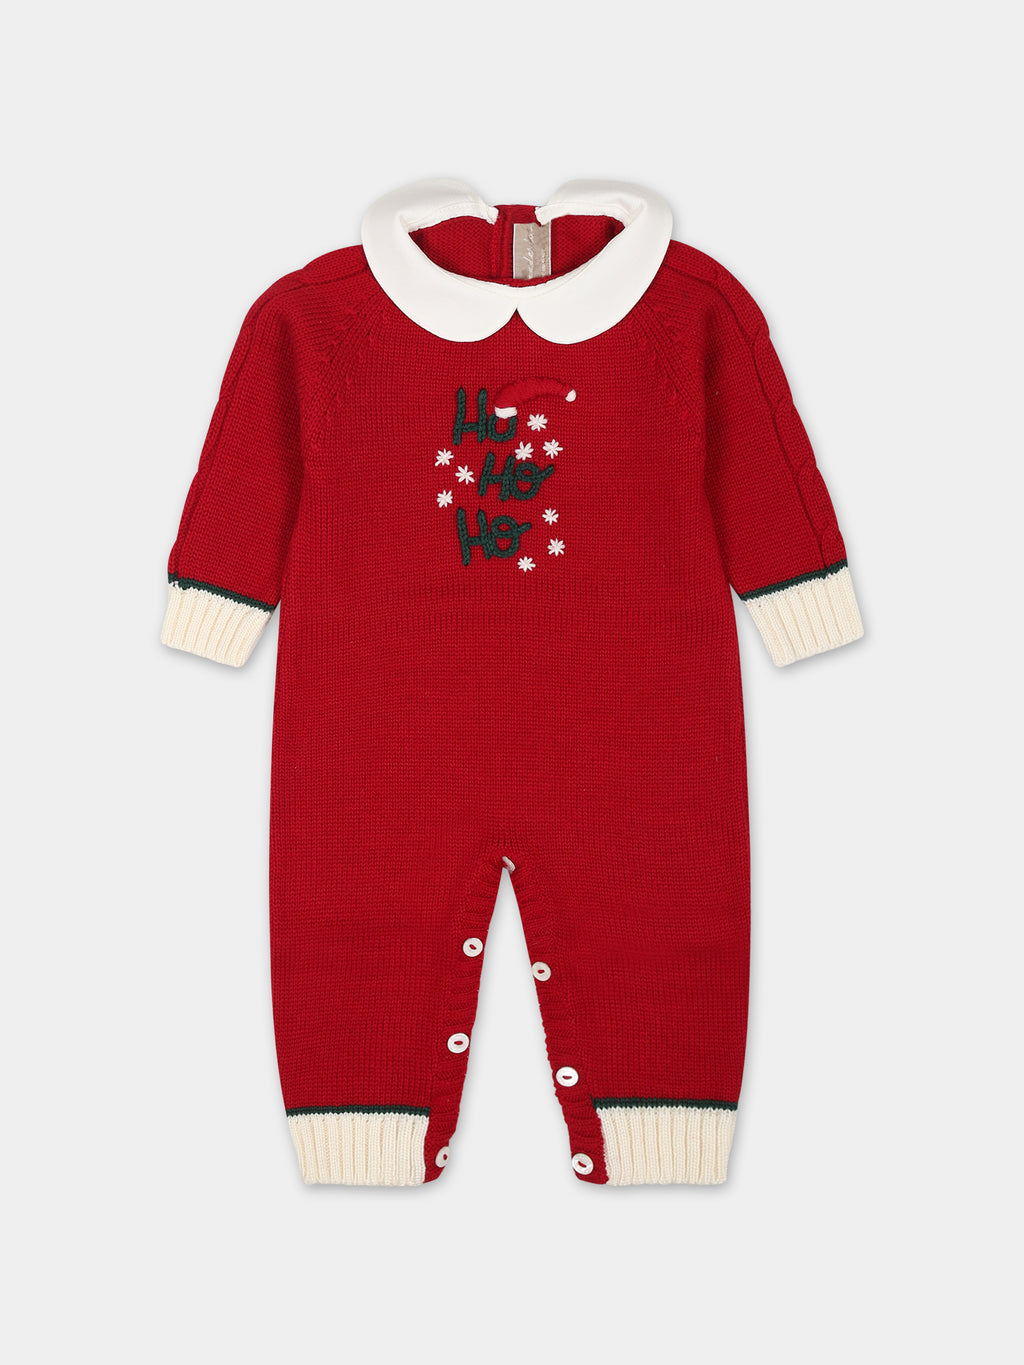 Red babygrow for babykids with writing